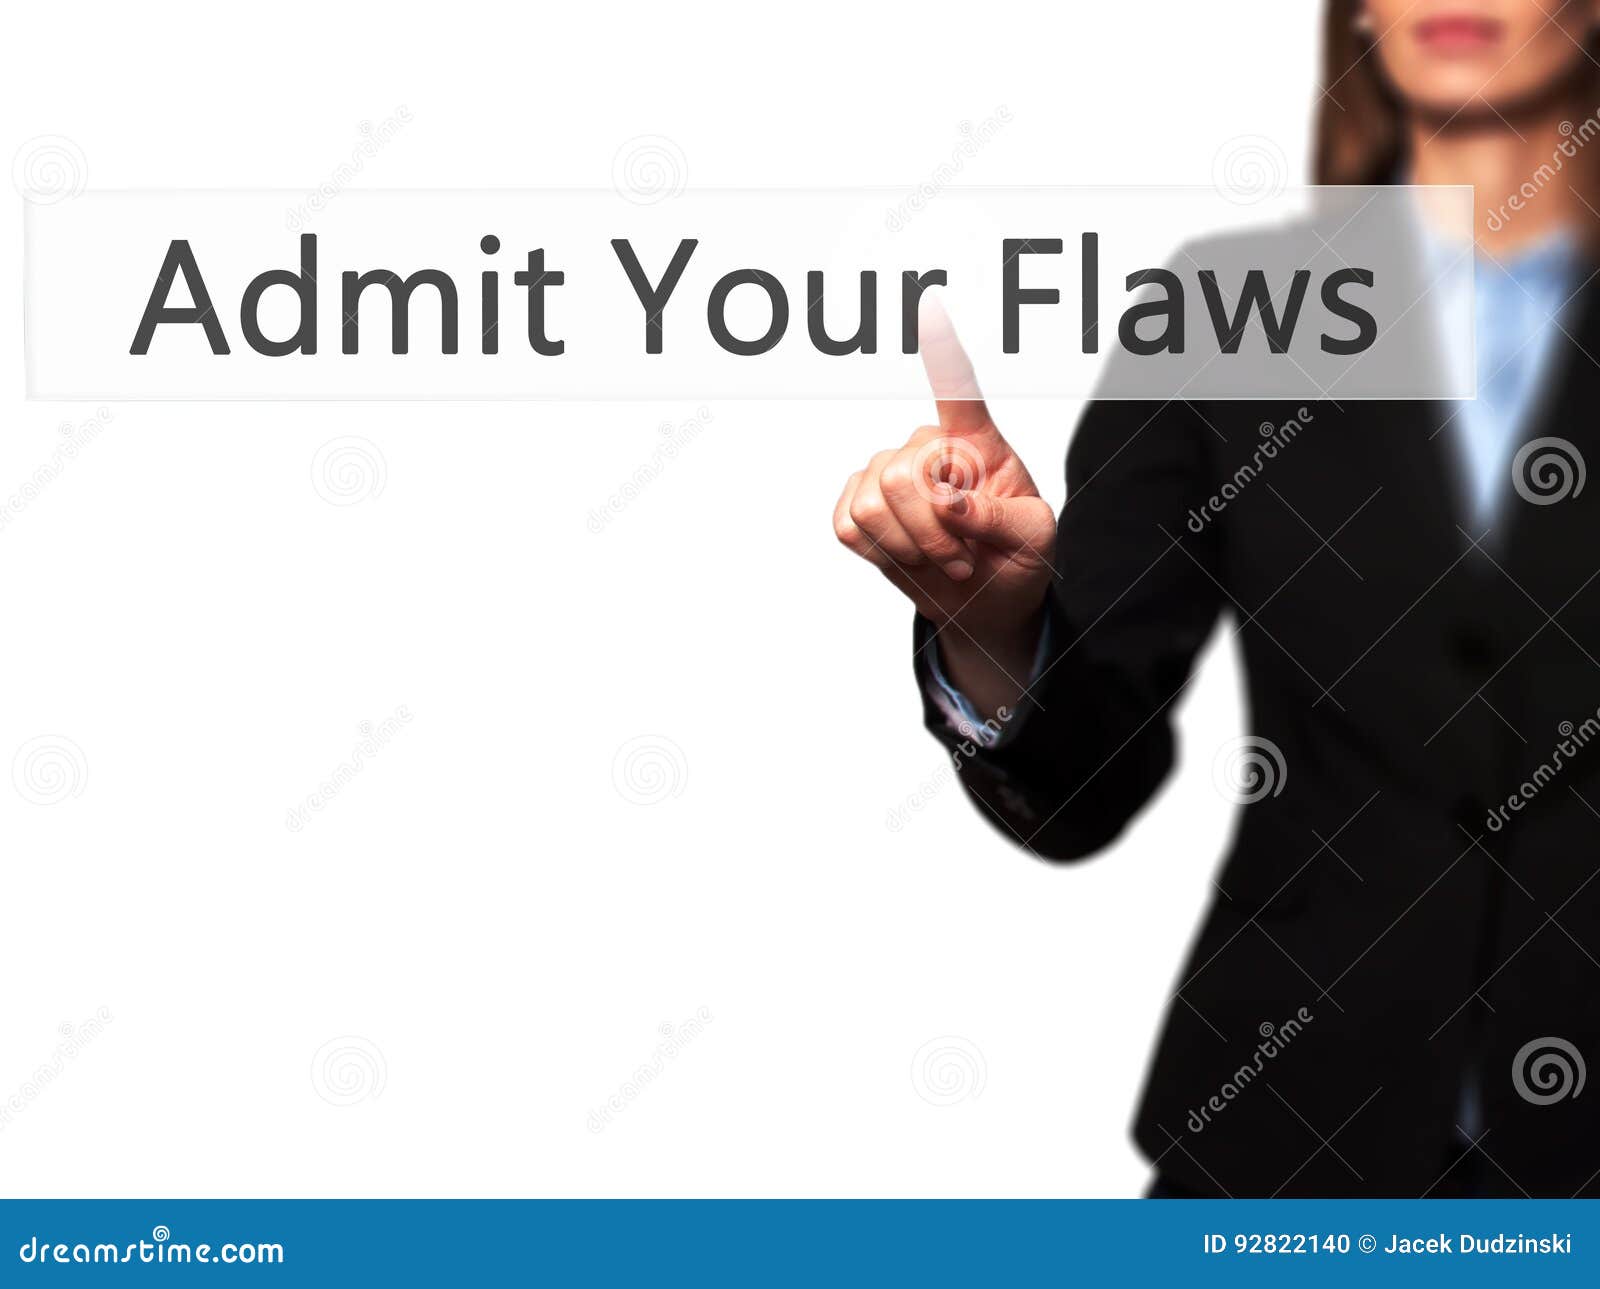 admit your flaws -  female hand touching or pointing to